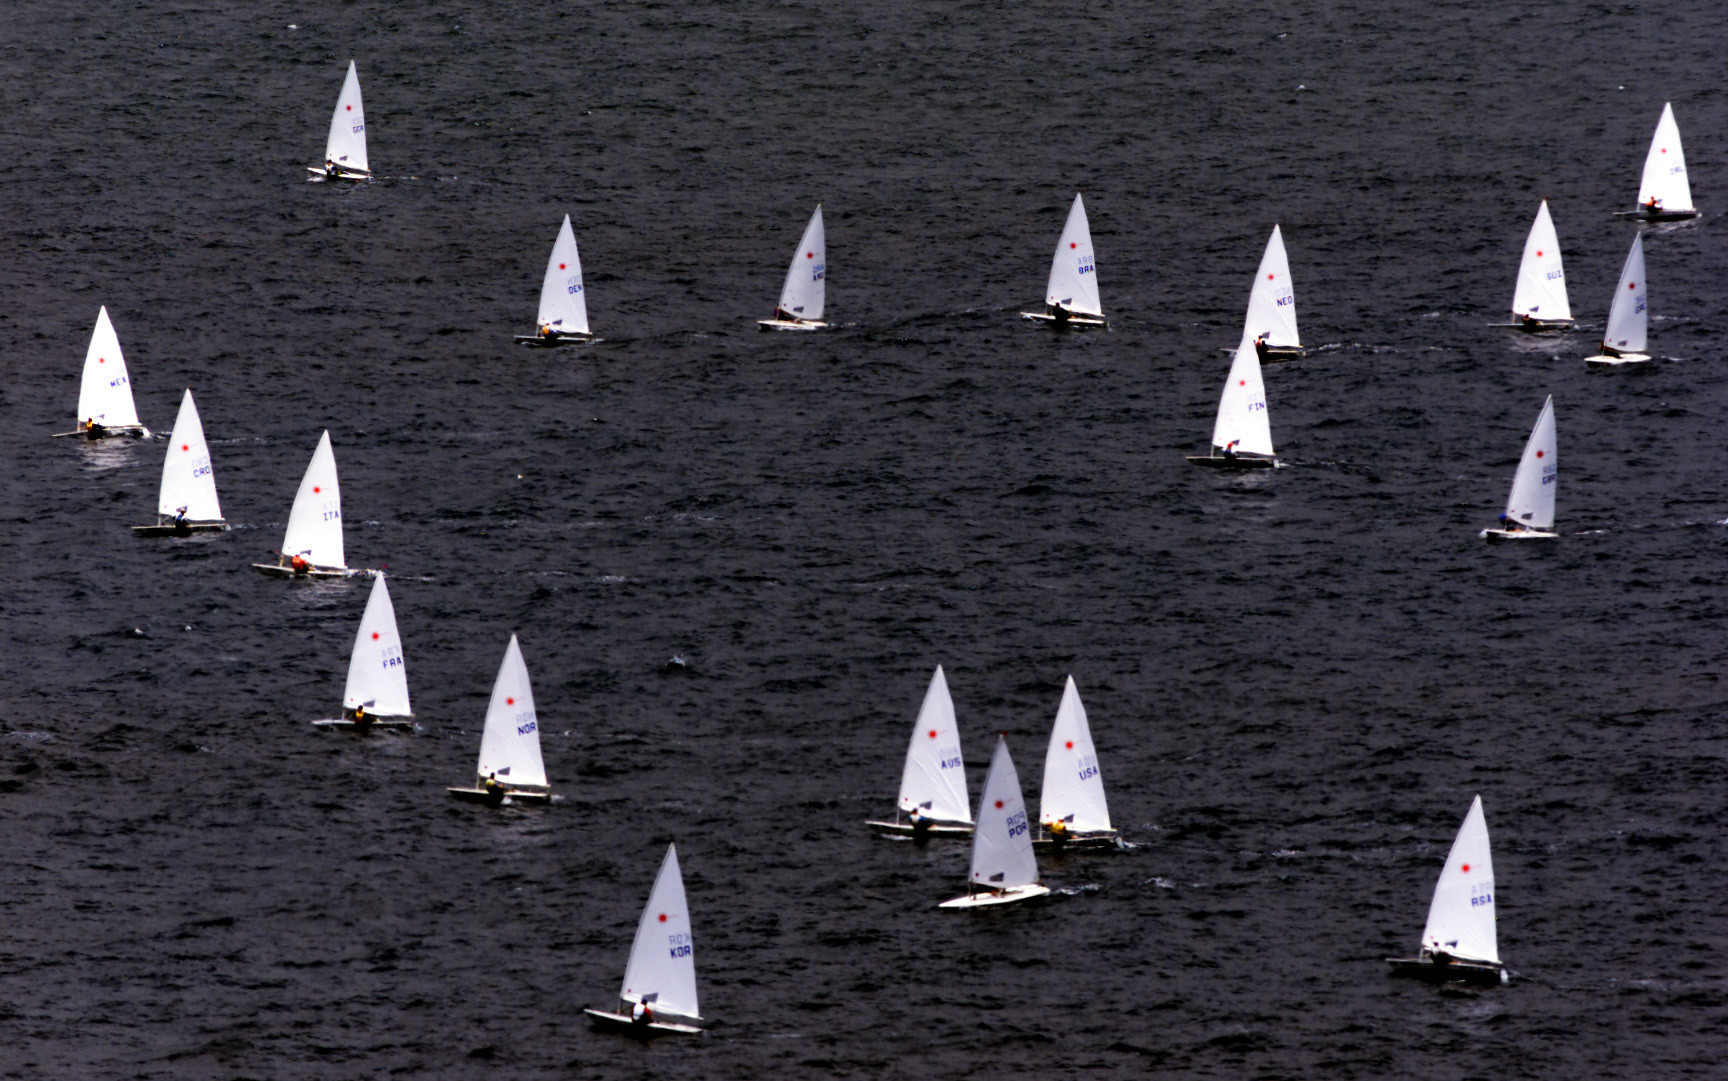 Oman is set to host the Youth Sailing World Championships ©Getty Images